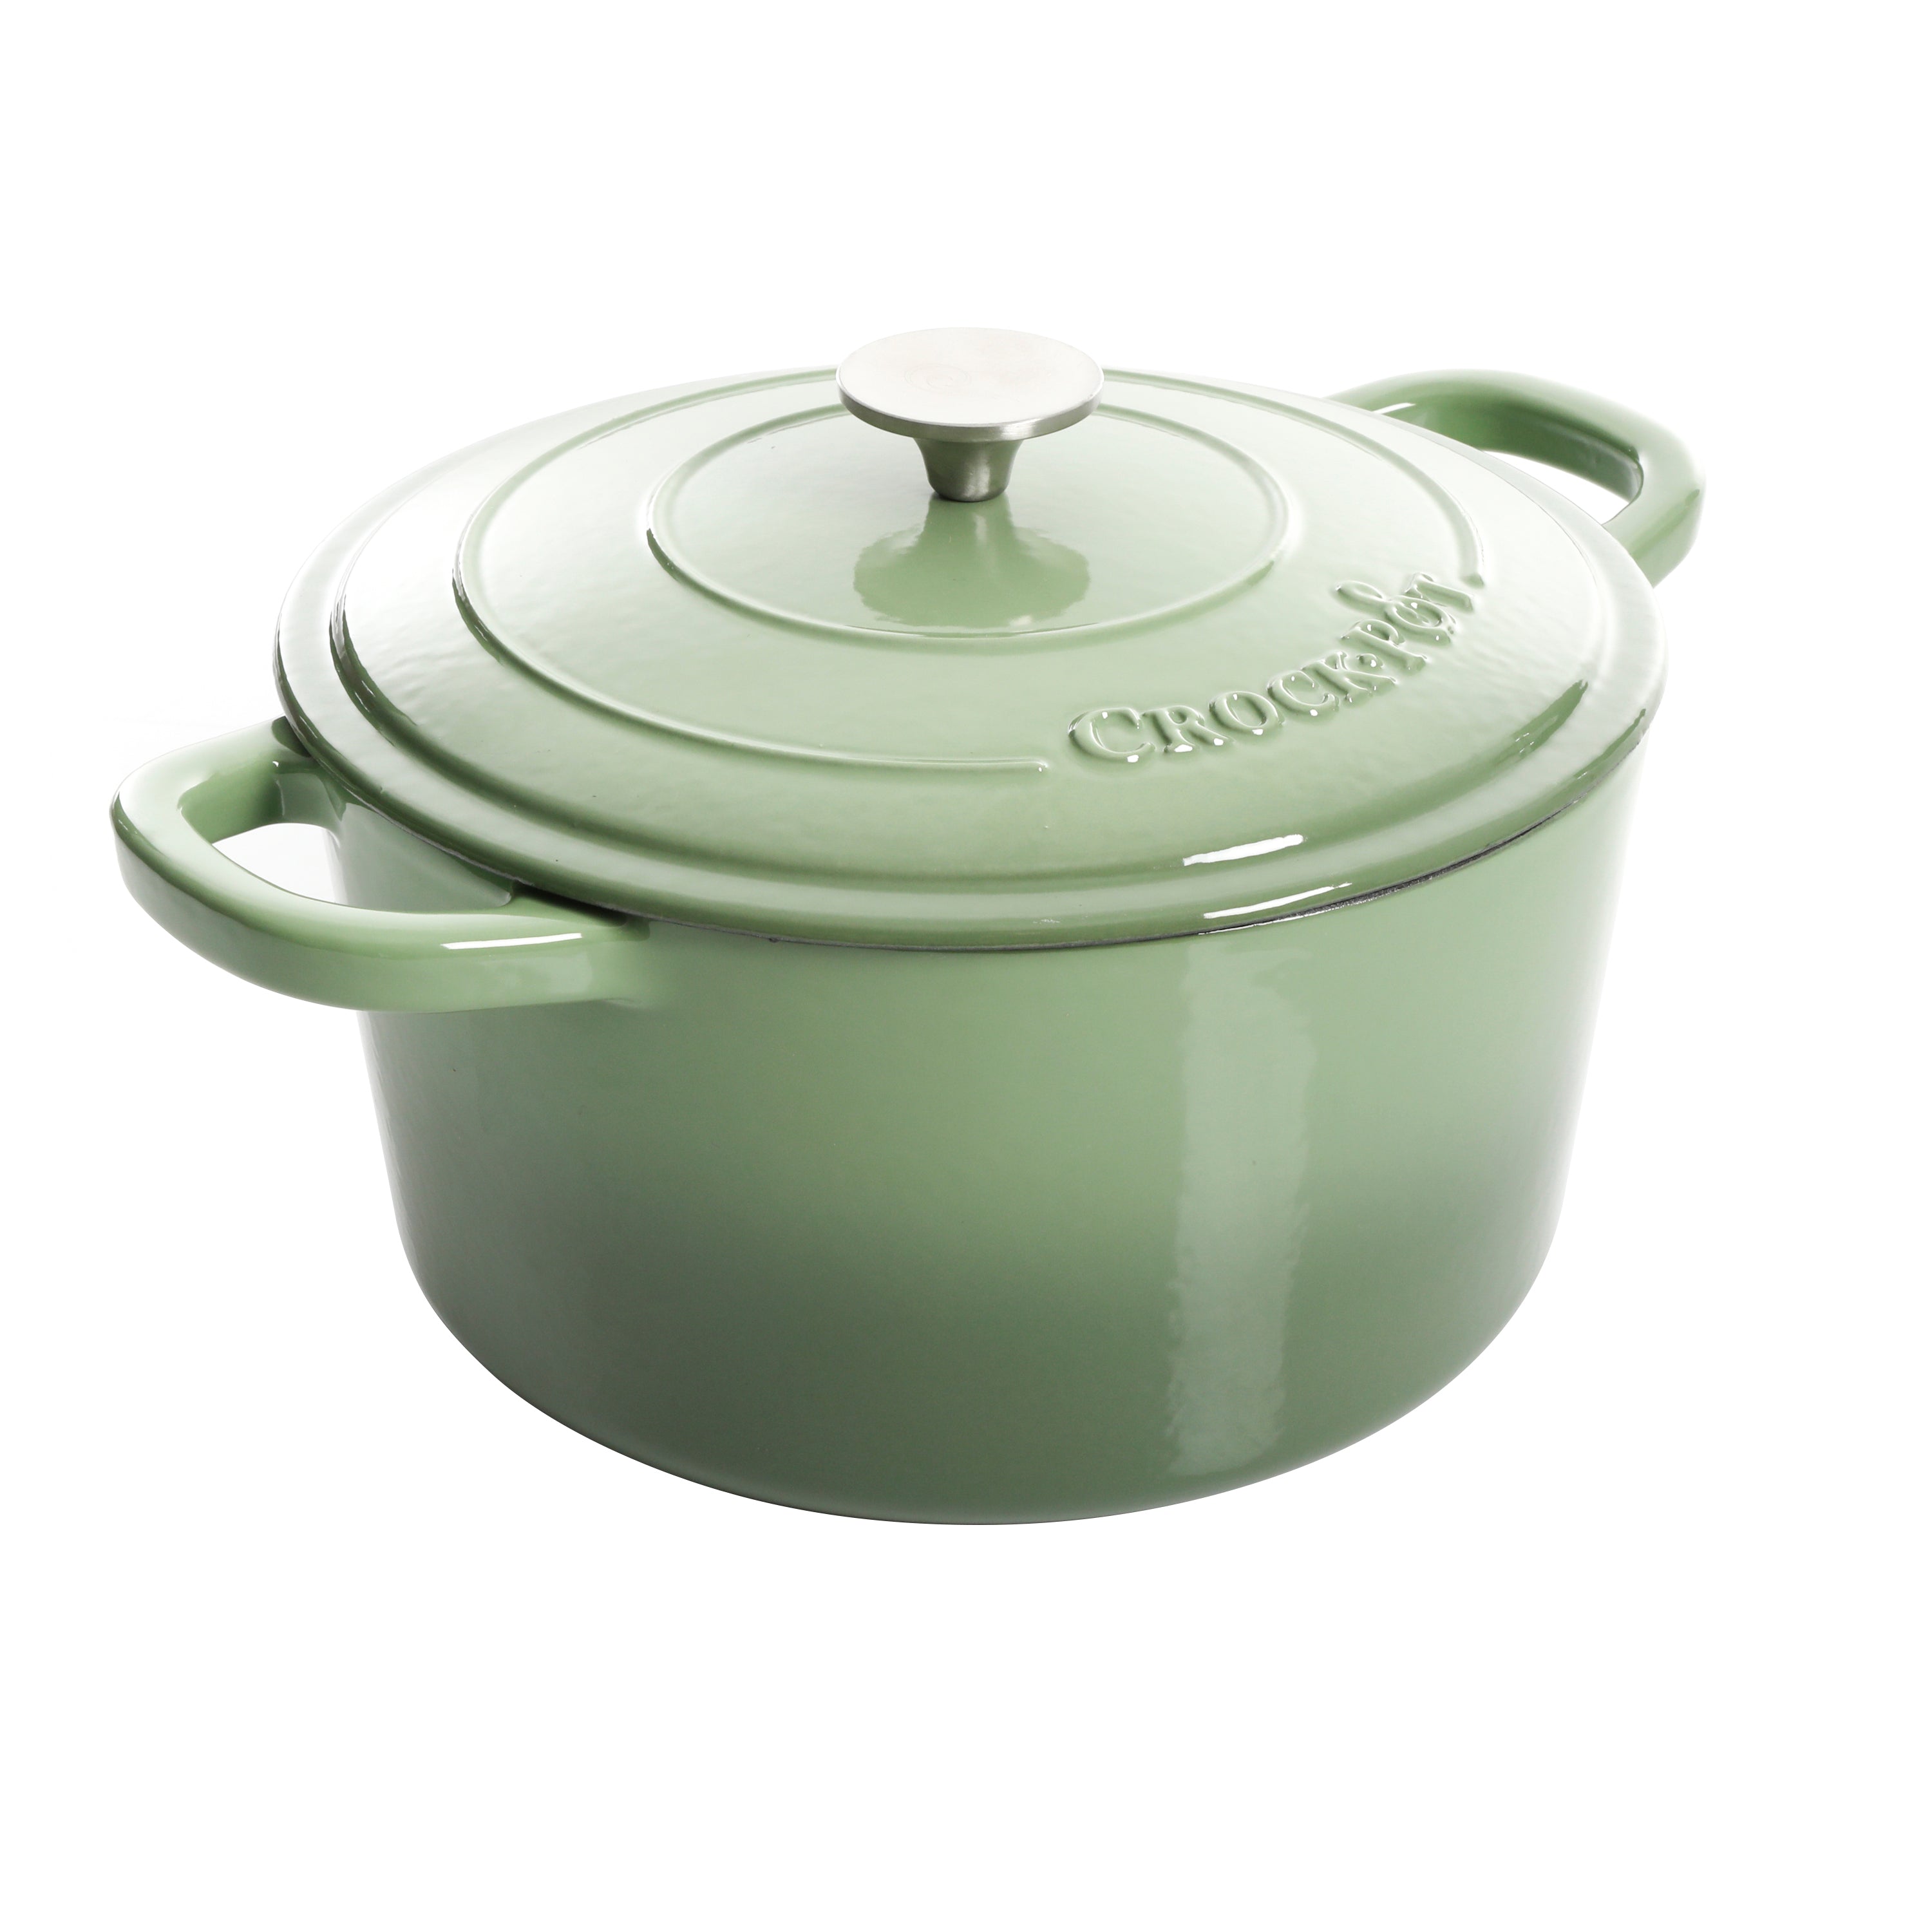 Crock-Pot Artisan 7 qt. Round Cast Iron Nonstick Dutch Oven in Pistachio  Green with Lid 985113366M - The Home Depot